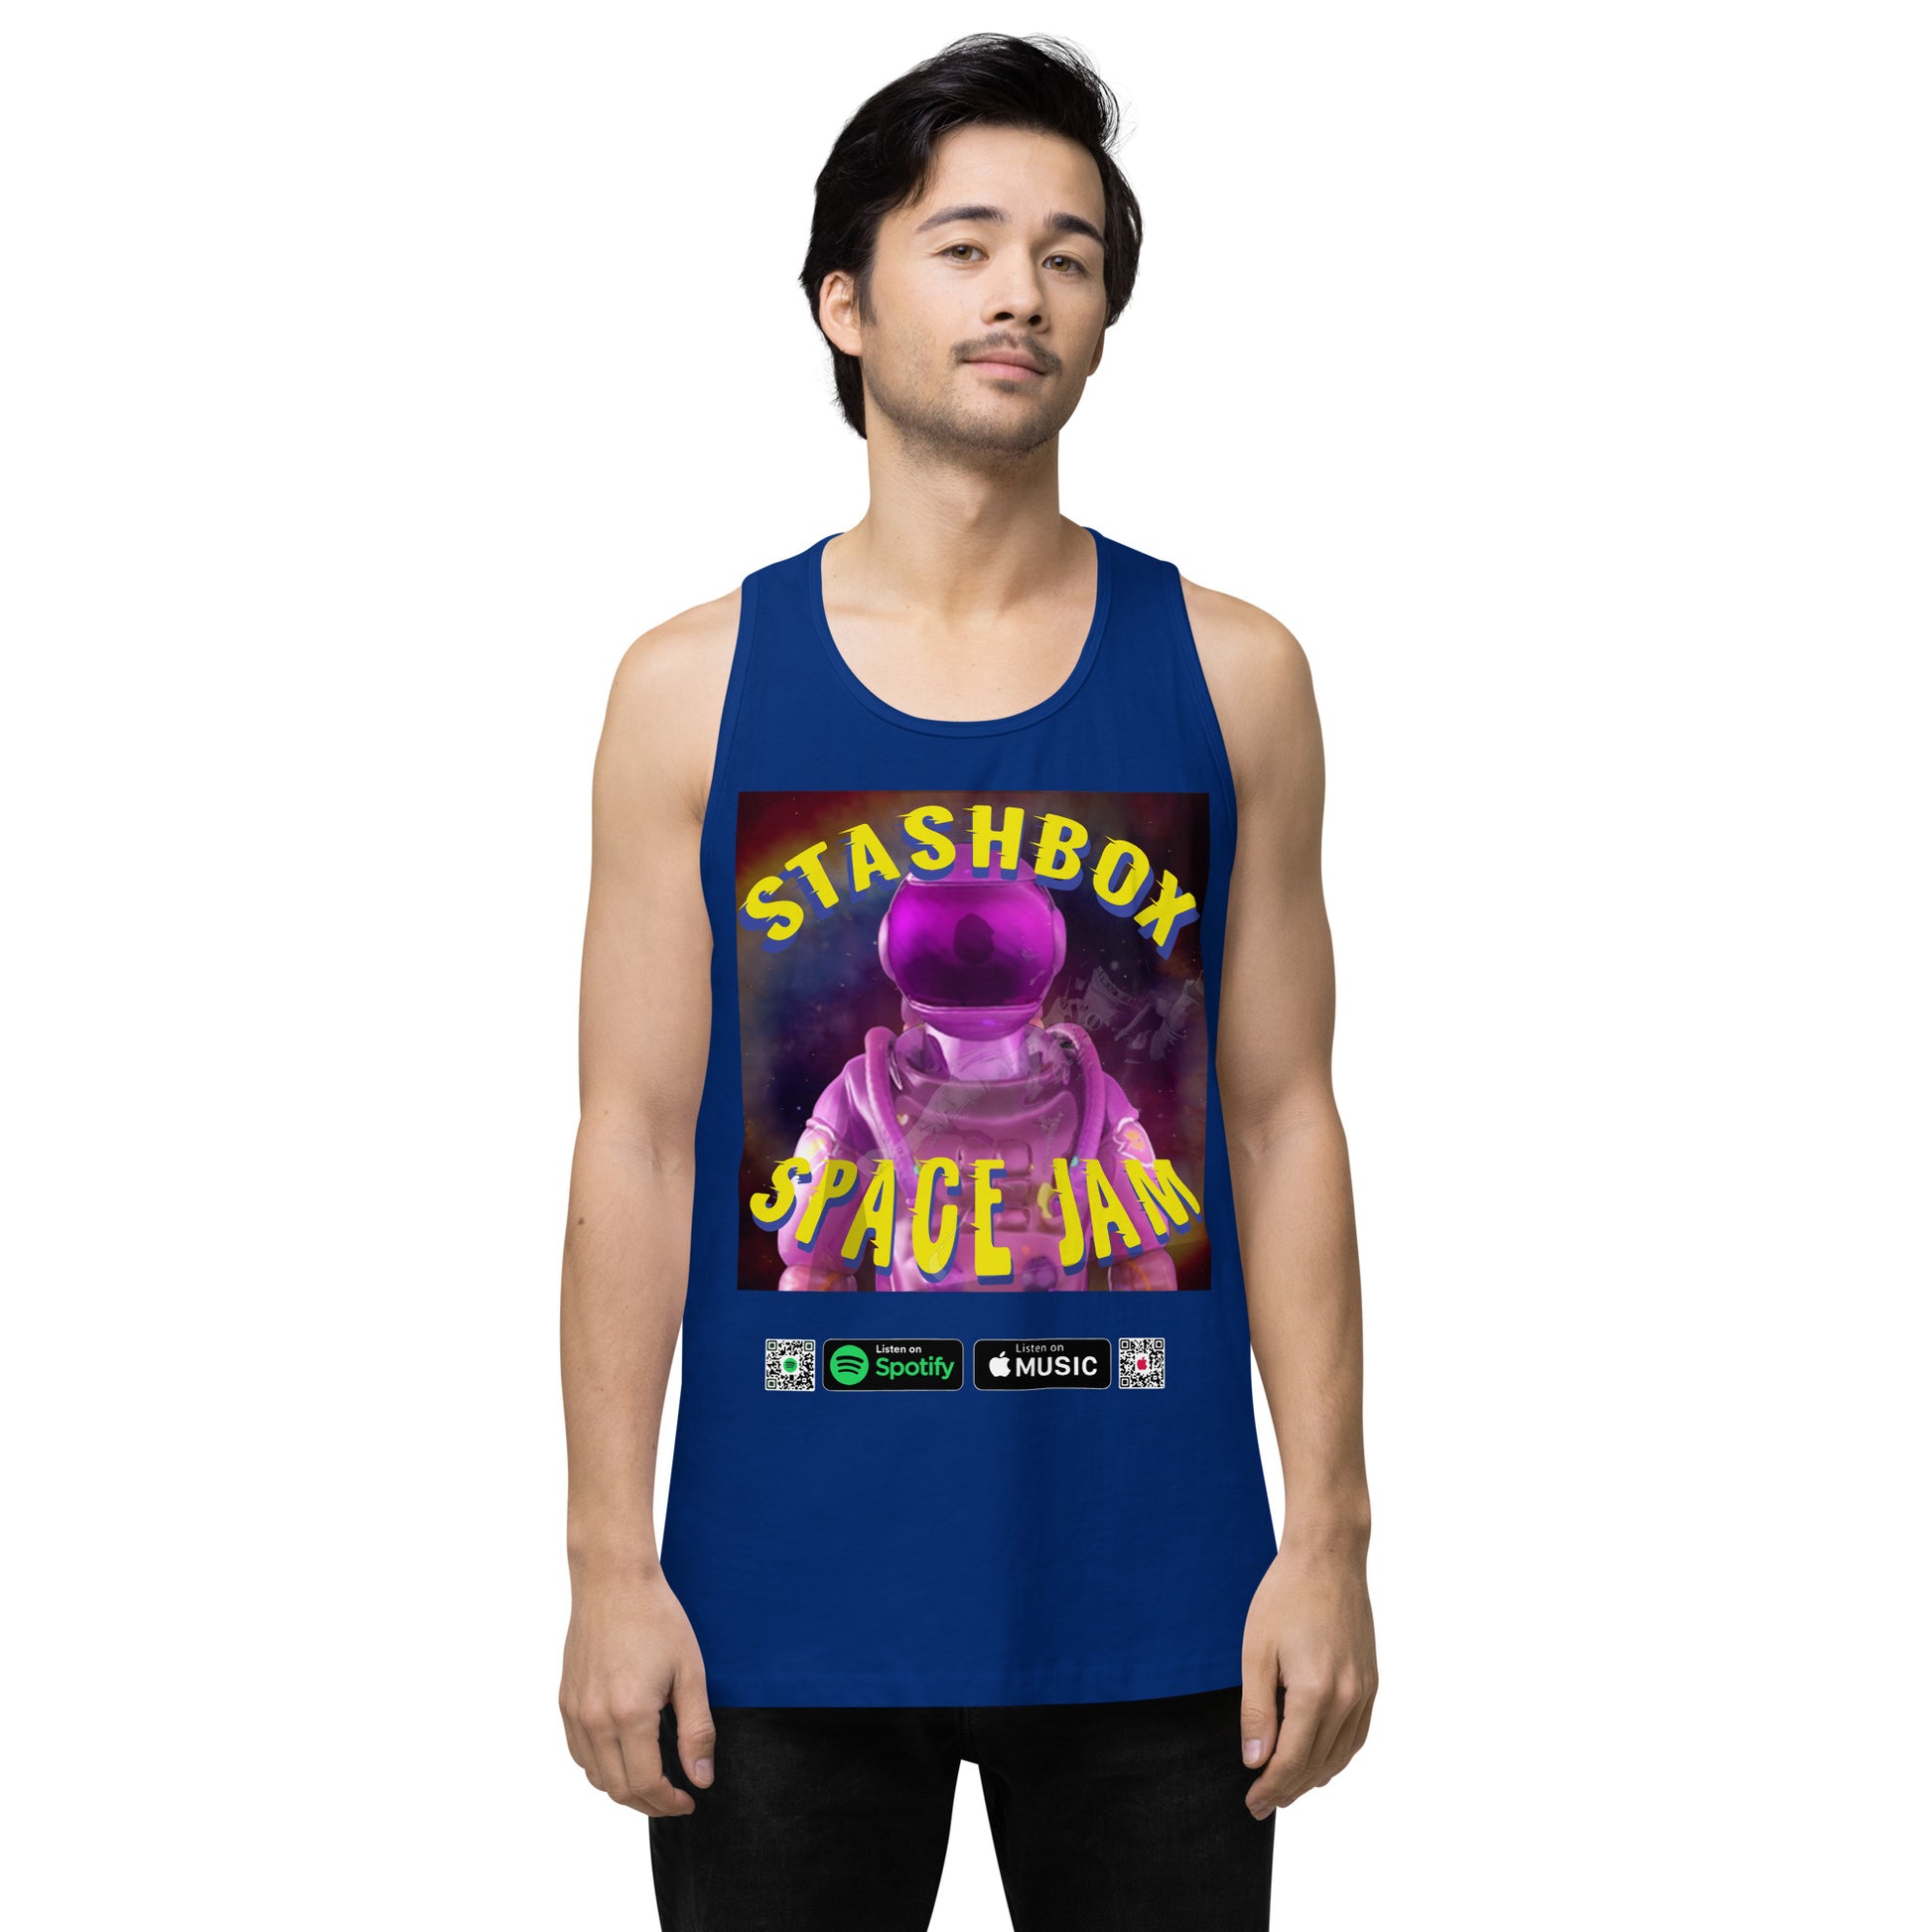 Galactic Comfort: Space Jam - Stashbox Men’s Premium Tank Top, Artwork #005. Experience out-of-this-world comfort with this cosmic tank. Ideal for stargazers and those who dream beyond the stars. #StashboxSpaceFashion #CosmicVibes #StellarComfort